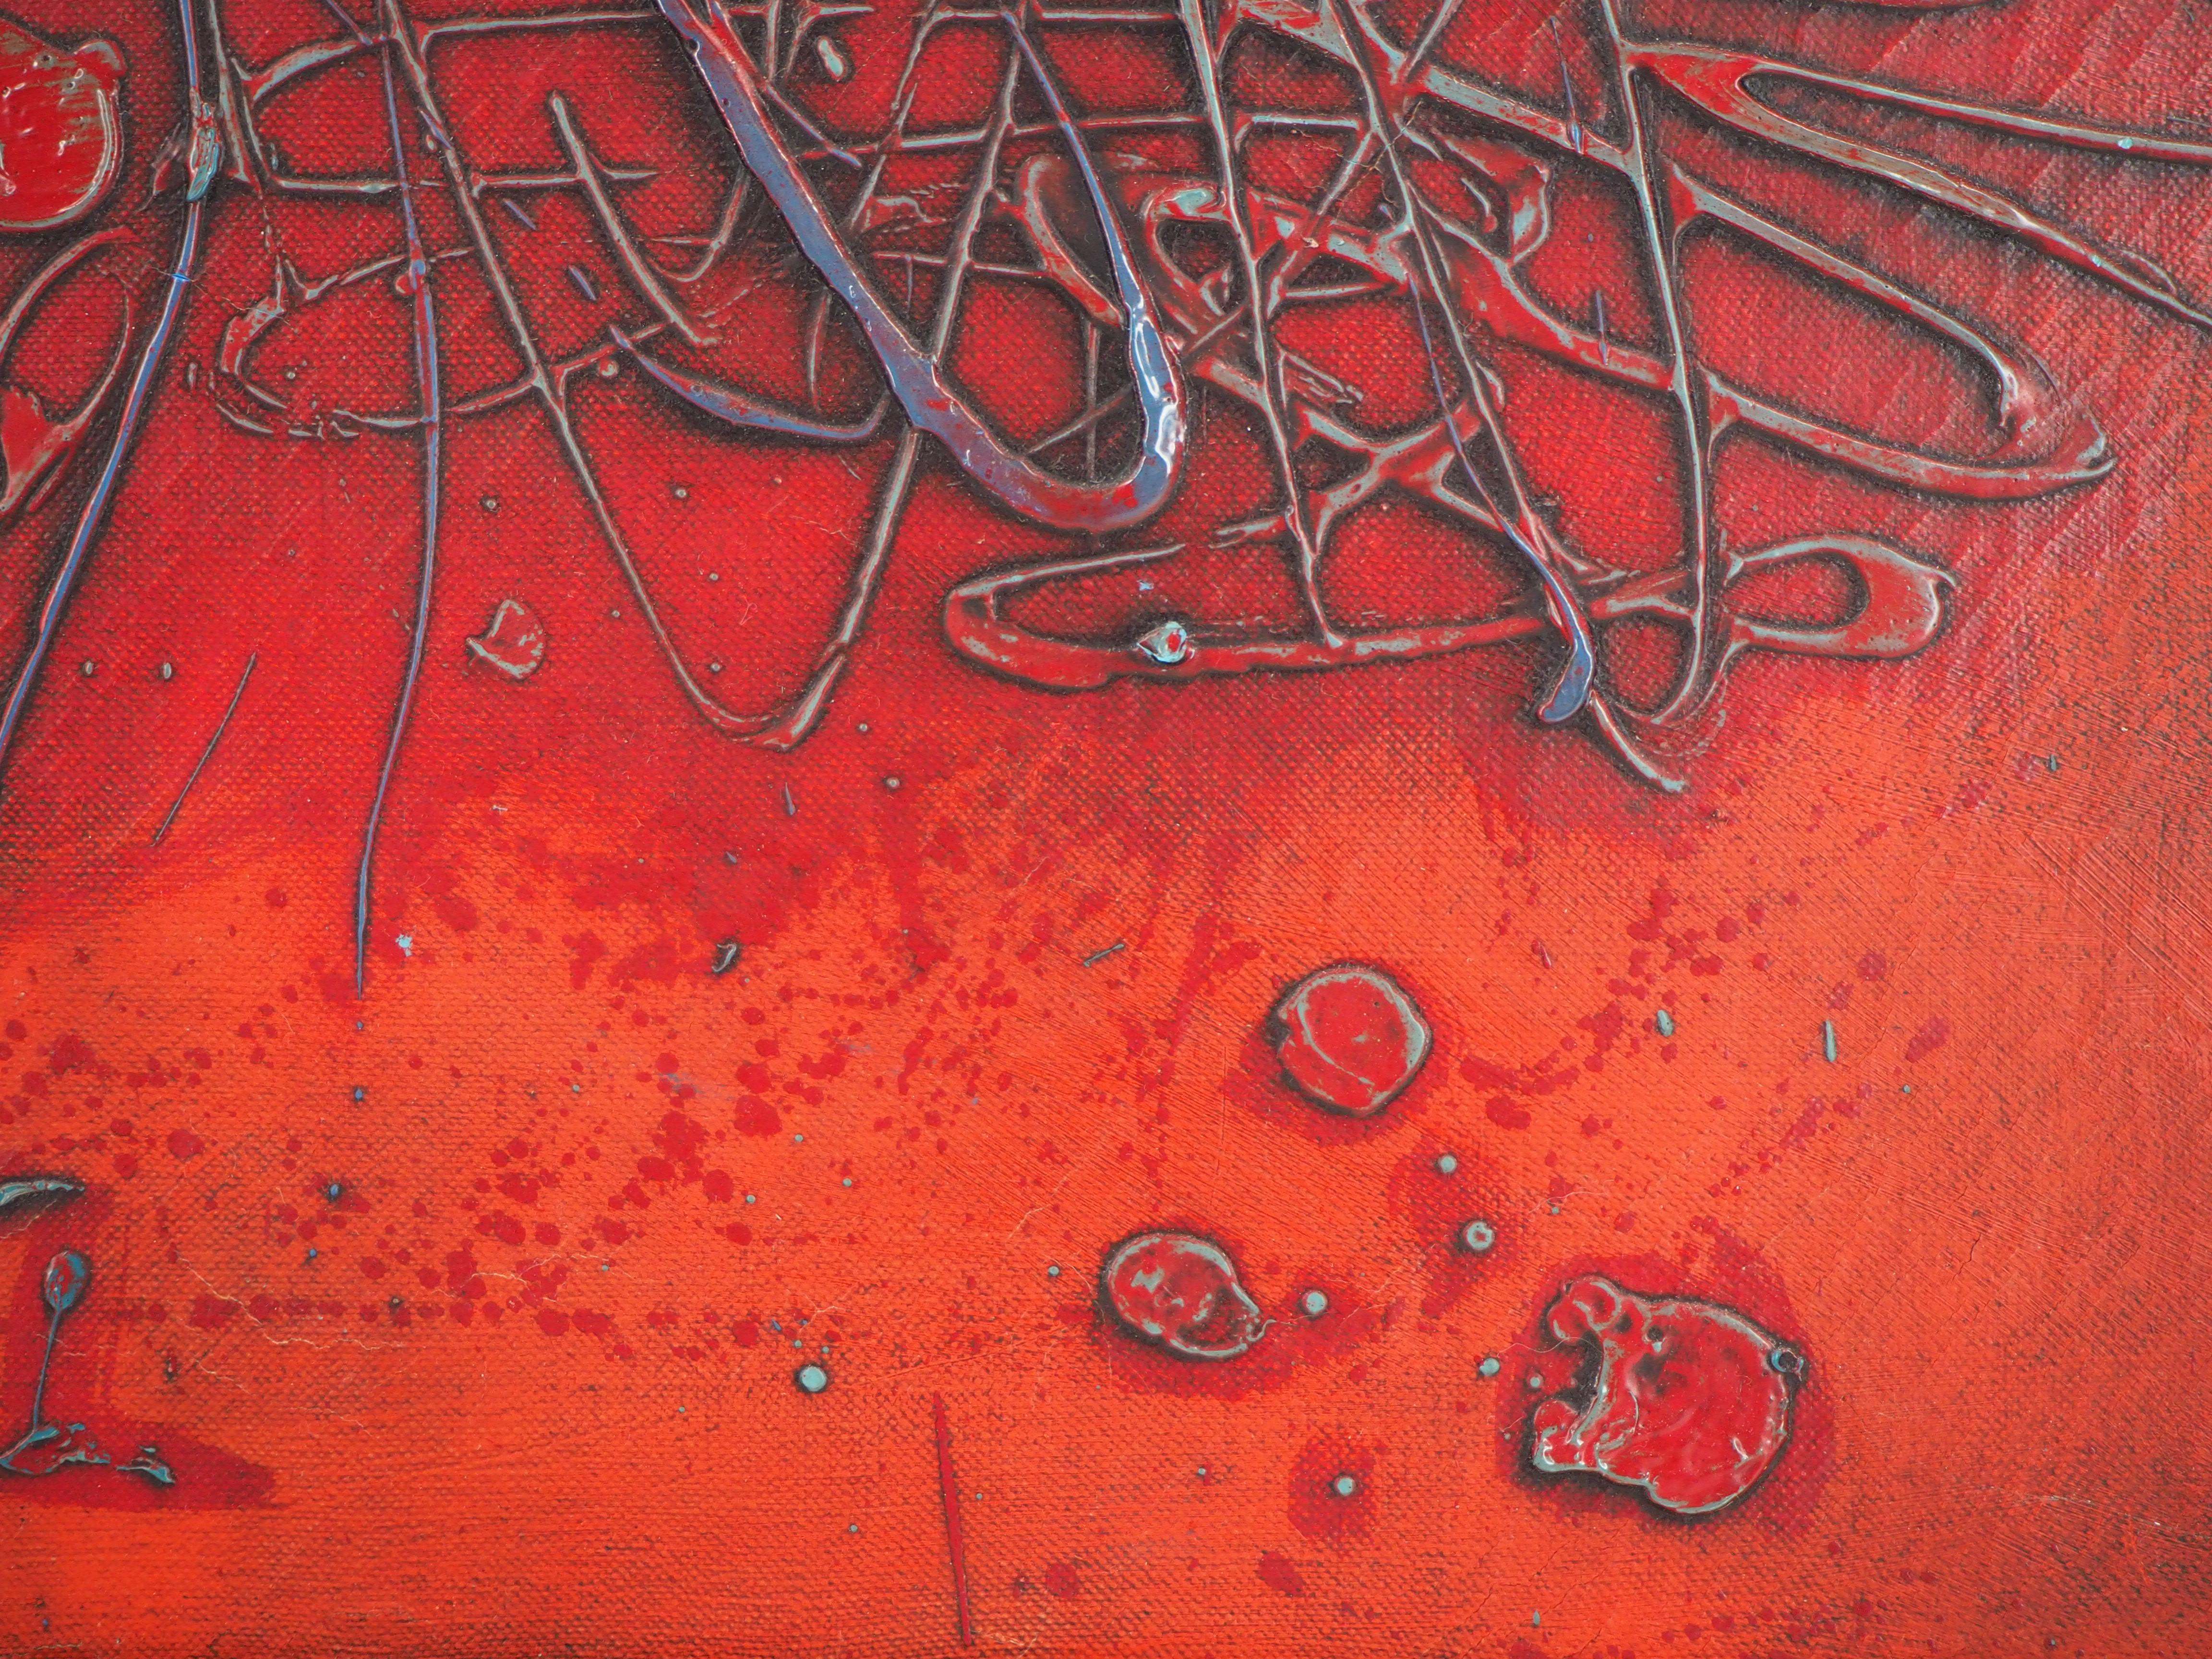 Abstraction in Red - Original oil on canvas - Signed 4